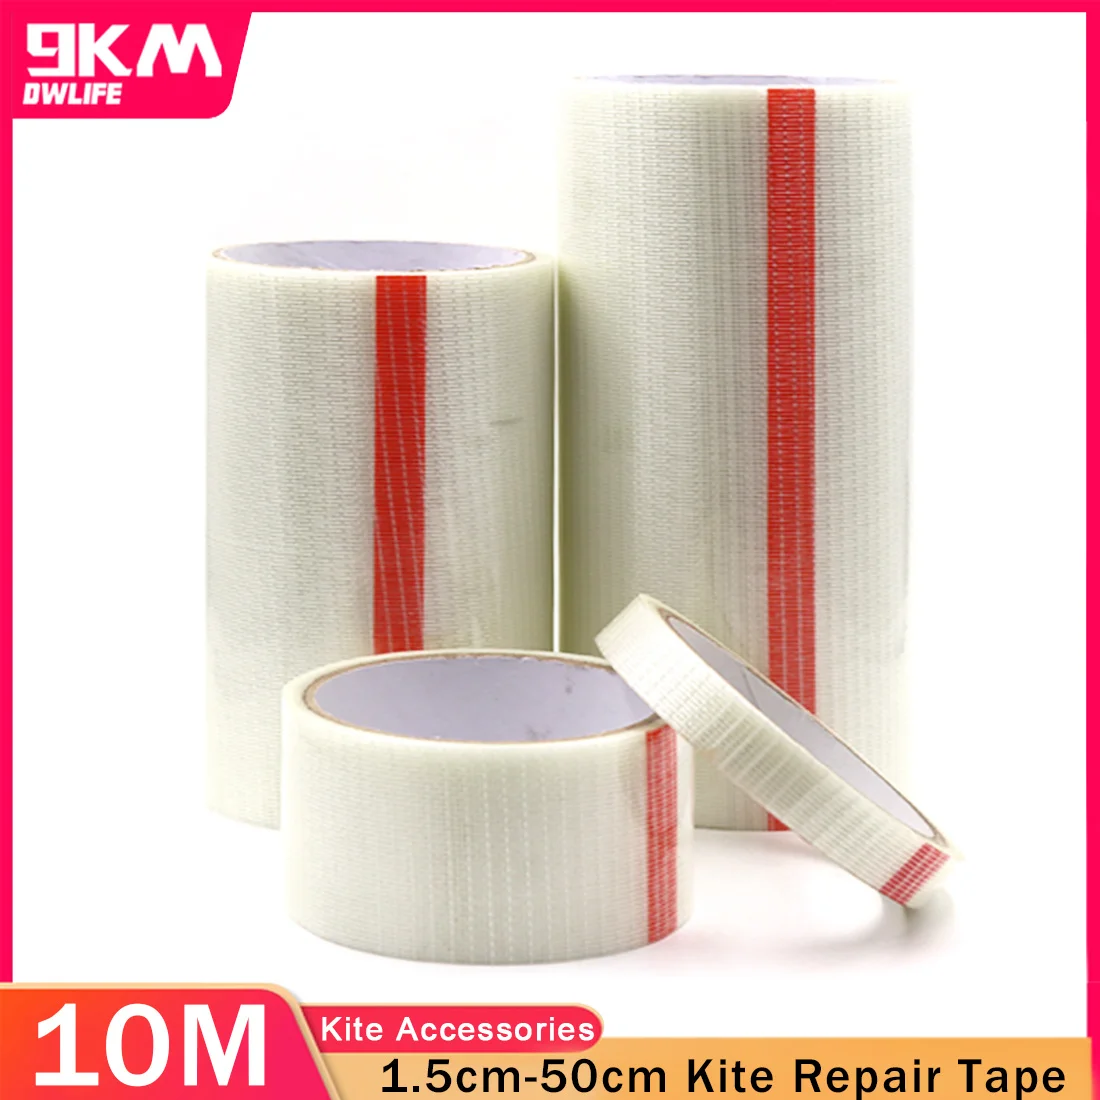 5x Waterproof Tent Repair Canvas Awning Sail Kites Adhesive Patches Tape Kit 